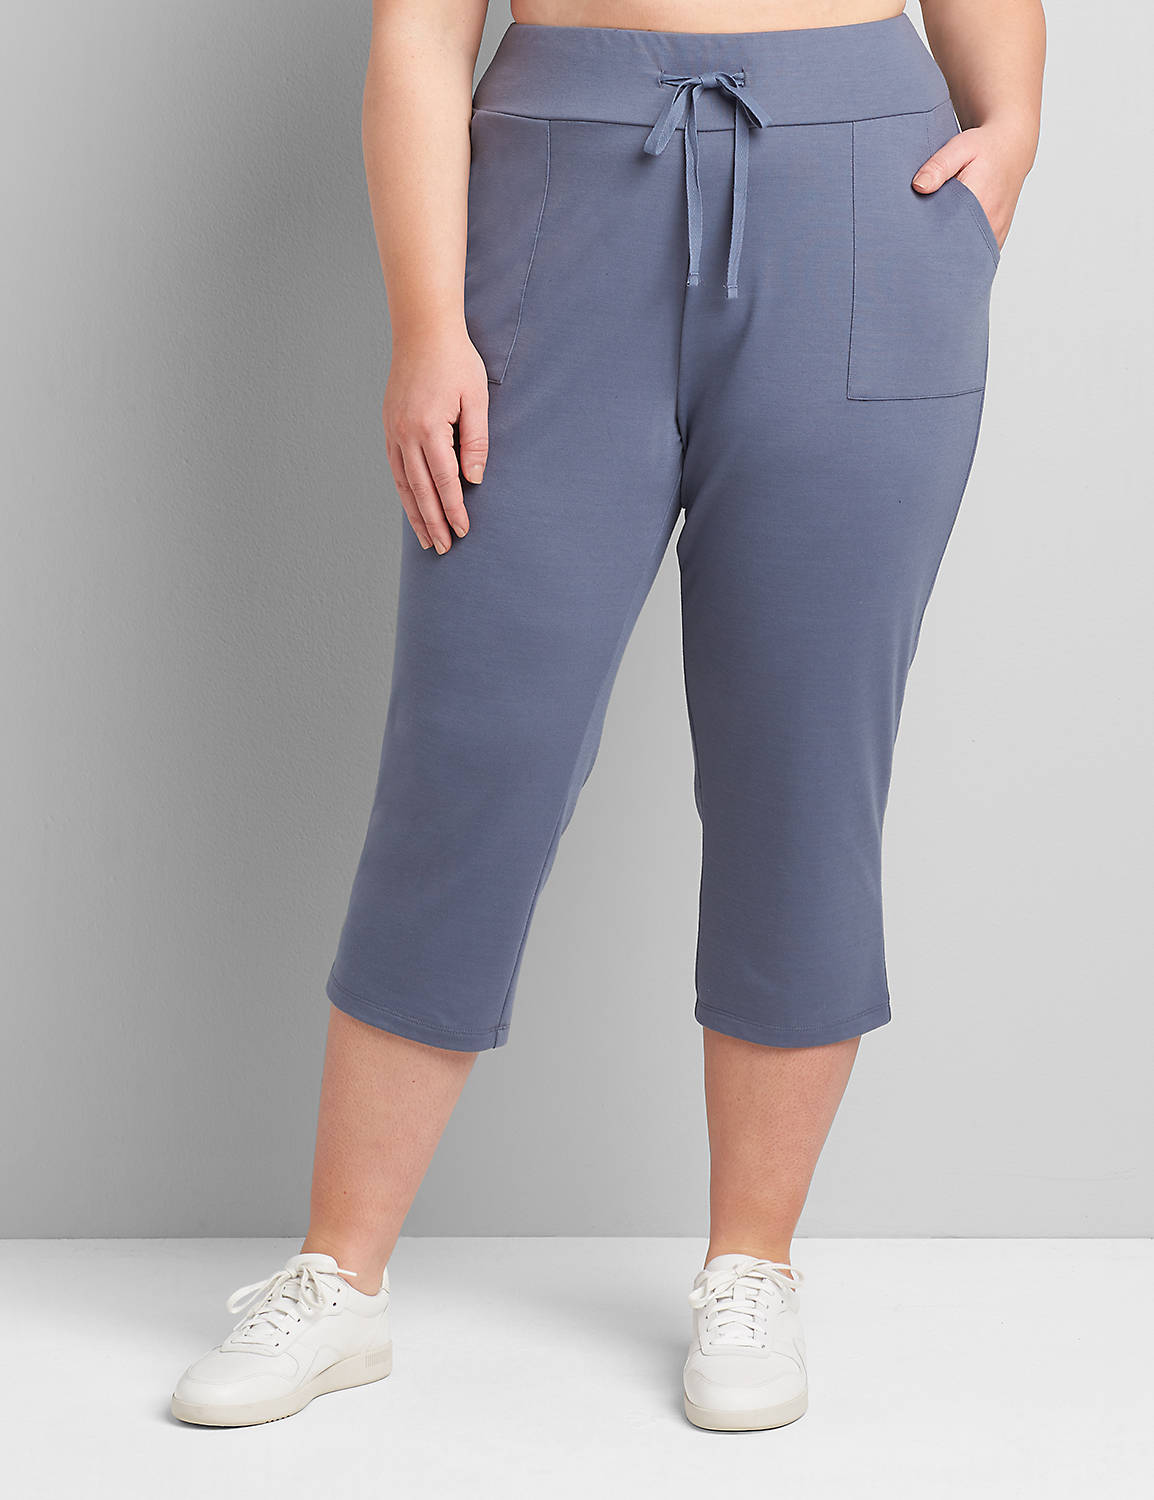 LIVI French Terry Crop Straight Pant Product Image 1